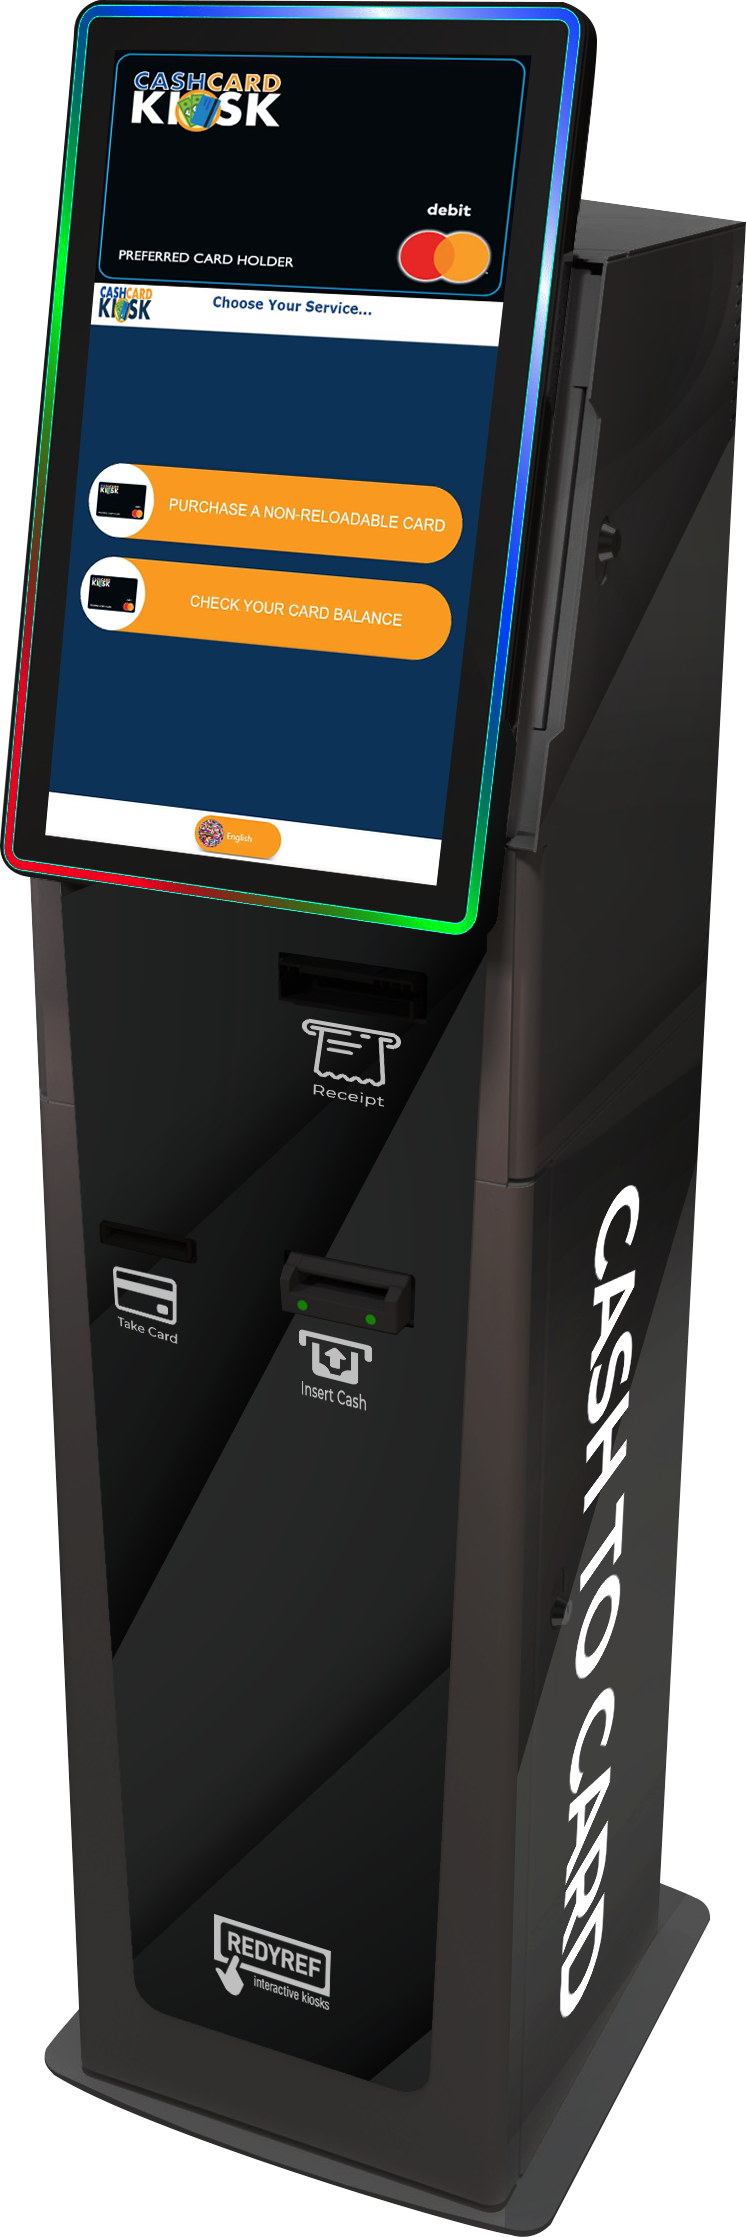 cash to card kiosk from REDYREF